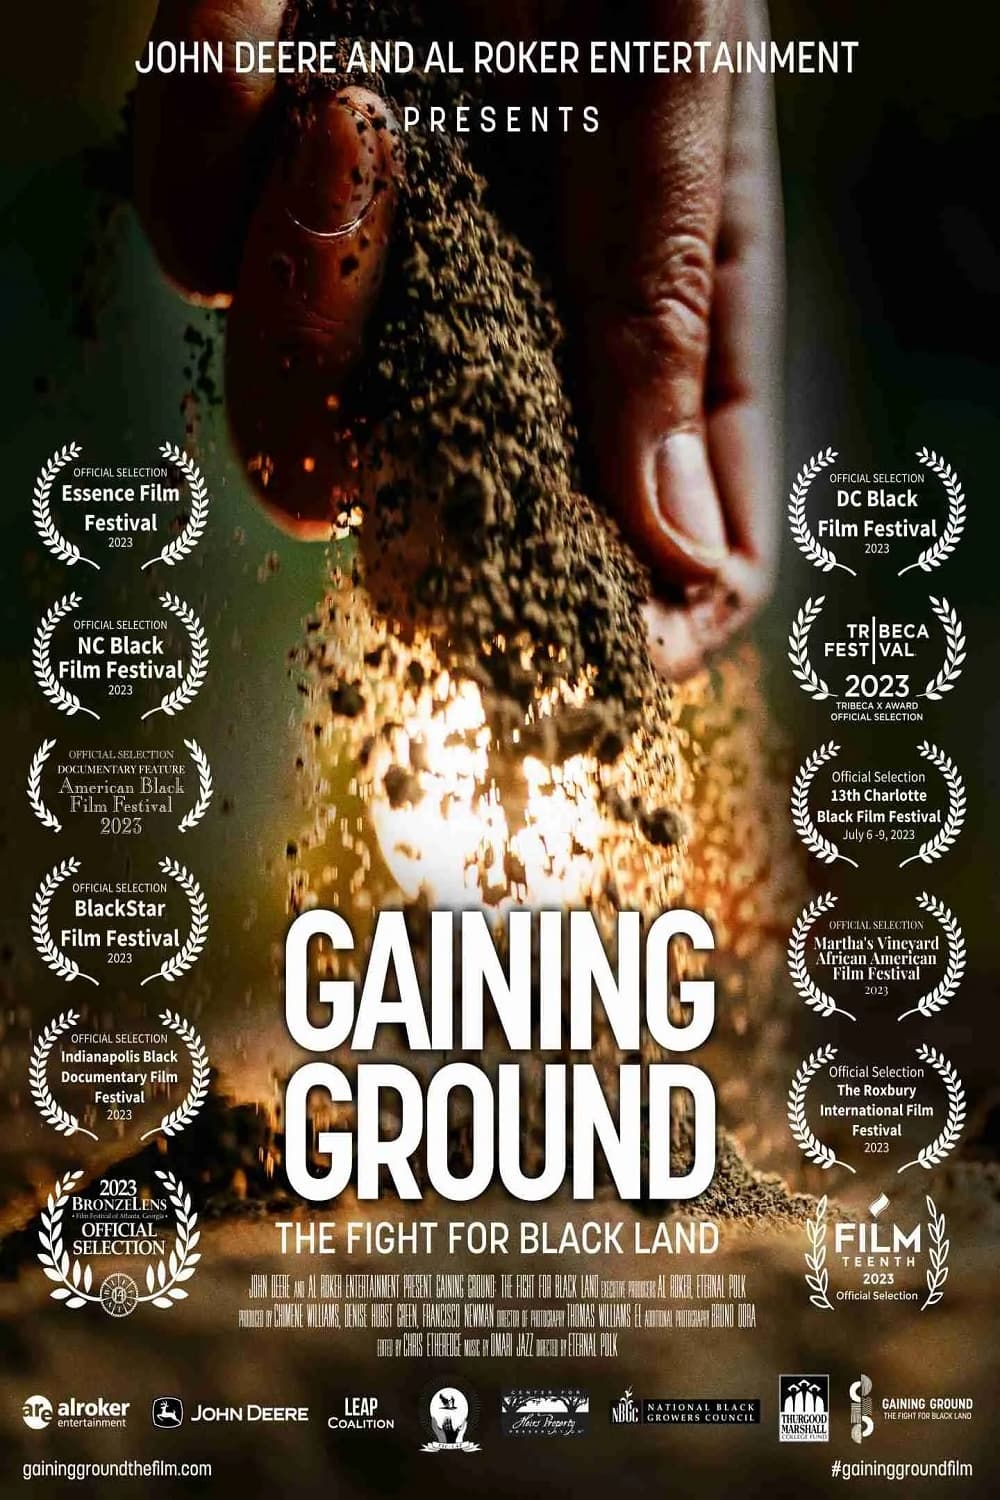 Gaining Ground: The Fight for Black Land